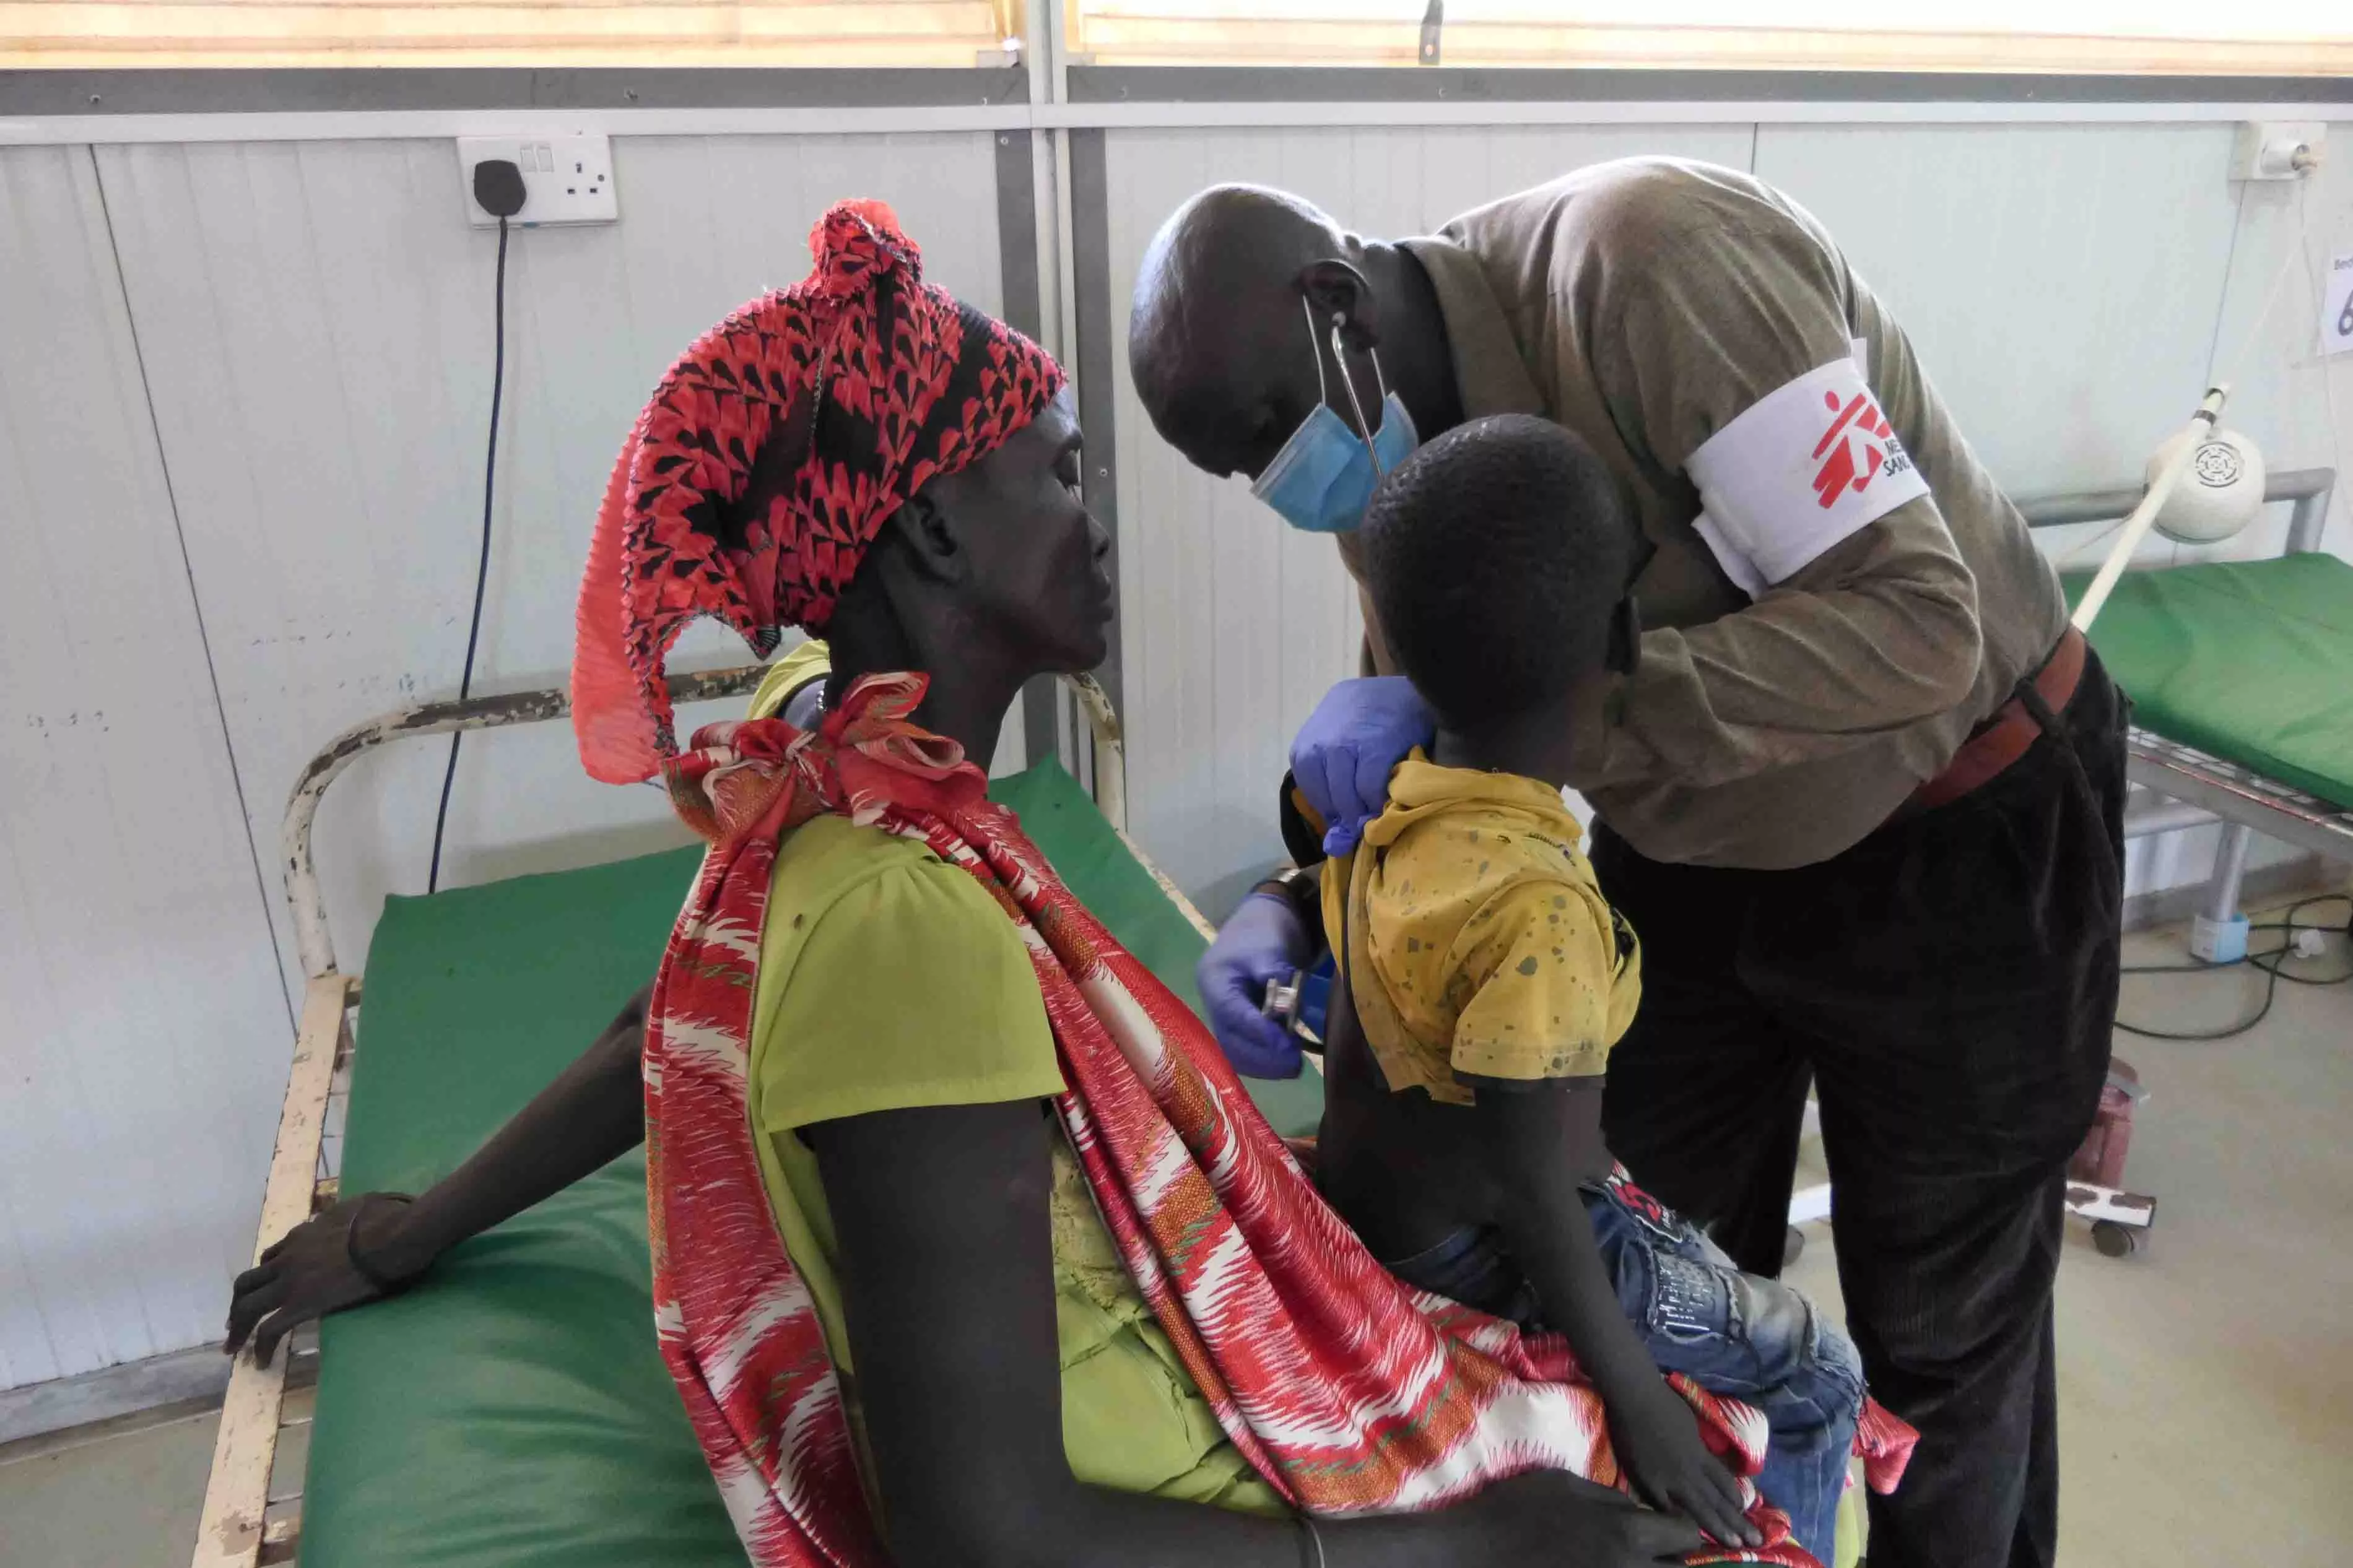 Kang Gatlok, 4 years old, during a medical consultation. Days before reaching the hospital, he tested positive for malaria. Despite receiving medication, fever persisted and his urine became dark. Then his mother decided to take him to the MSF hosptial in Bentiu camp where he was diagnosed with hepatitis E.